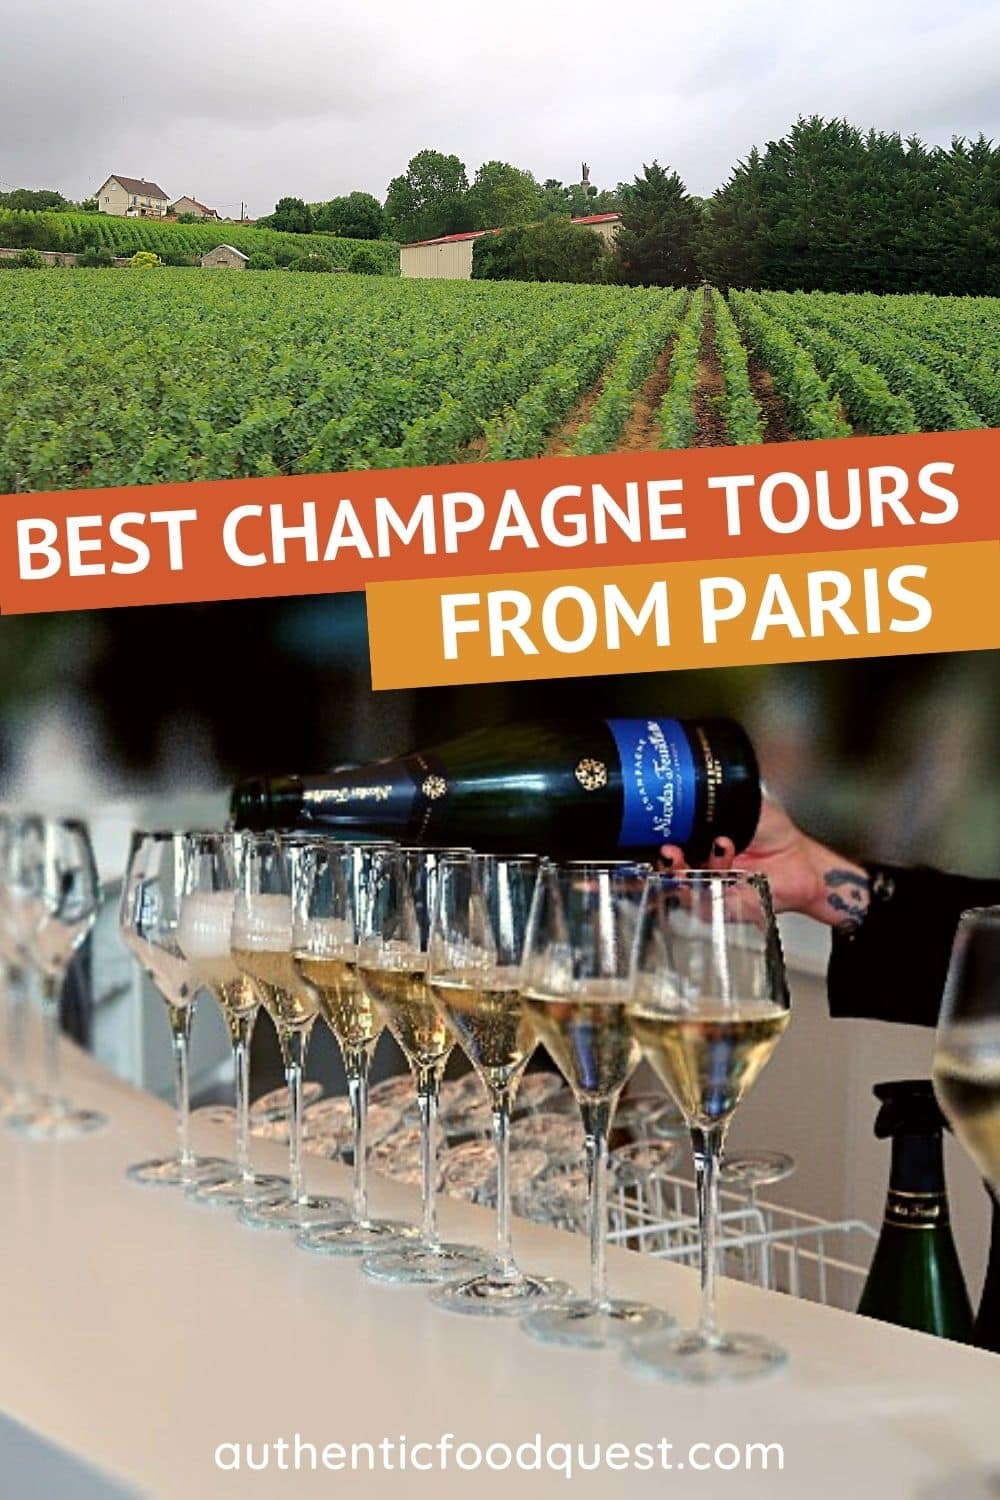 Moet et Chandon Tasting and Fun Private Tour in Champagne